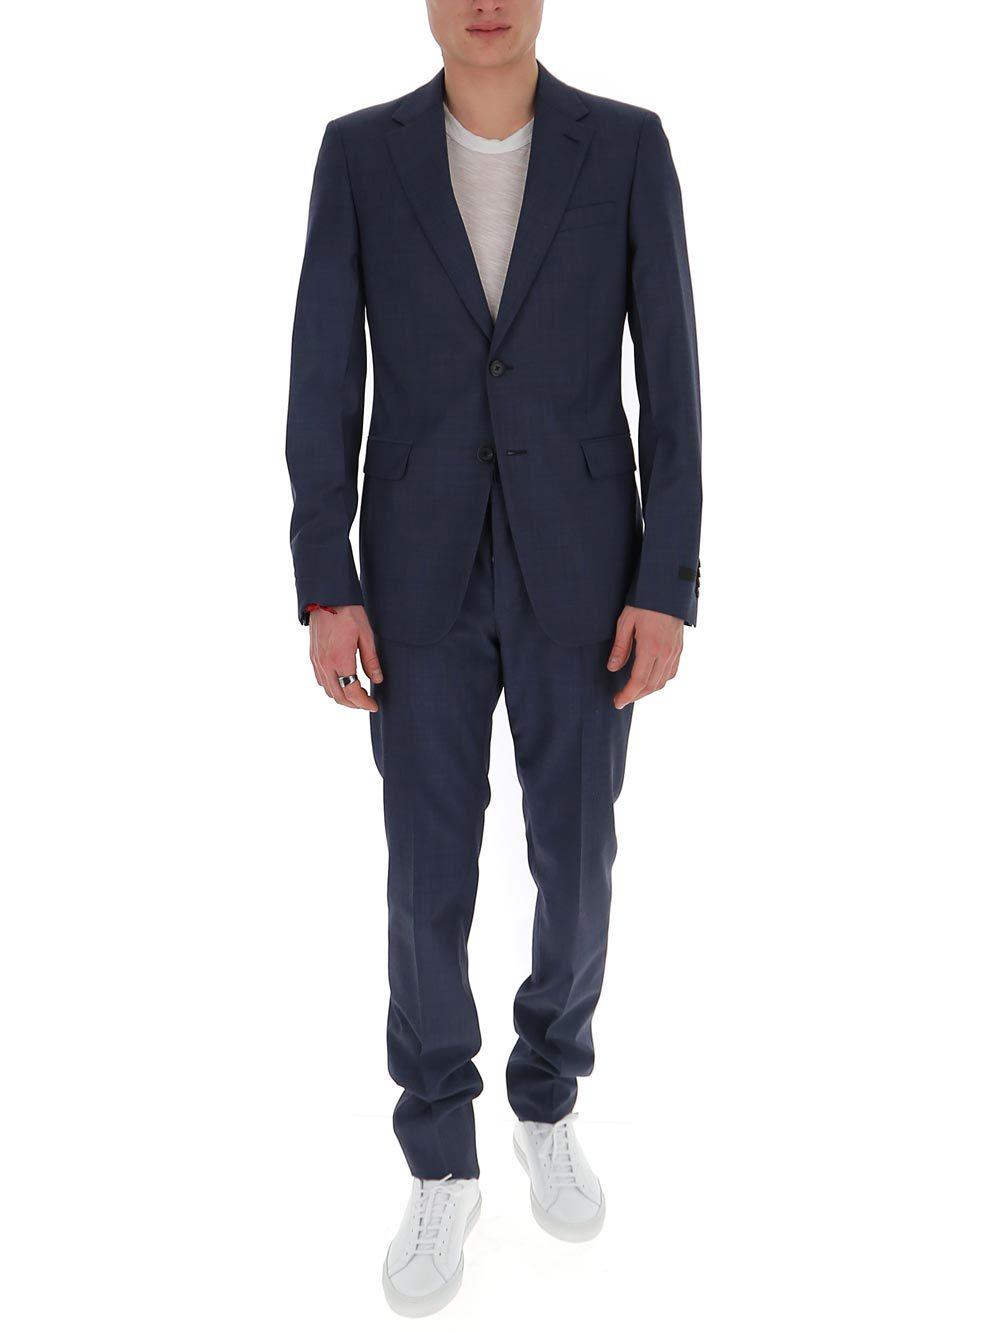 Prada Formal Tailored Suit in Blue for Men - Save 43% - Lyst